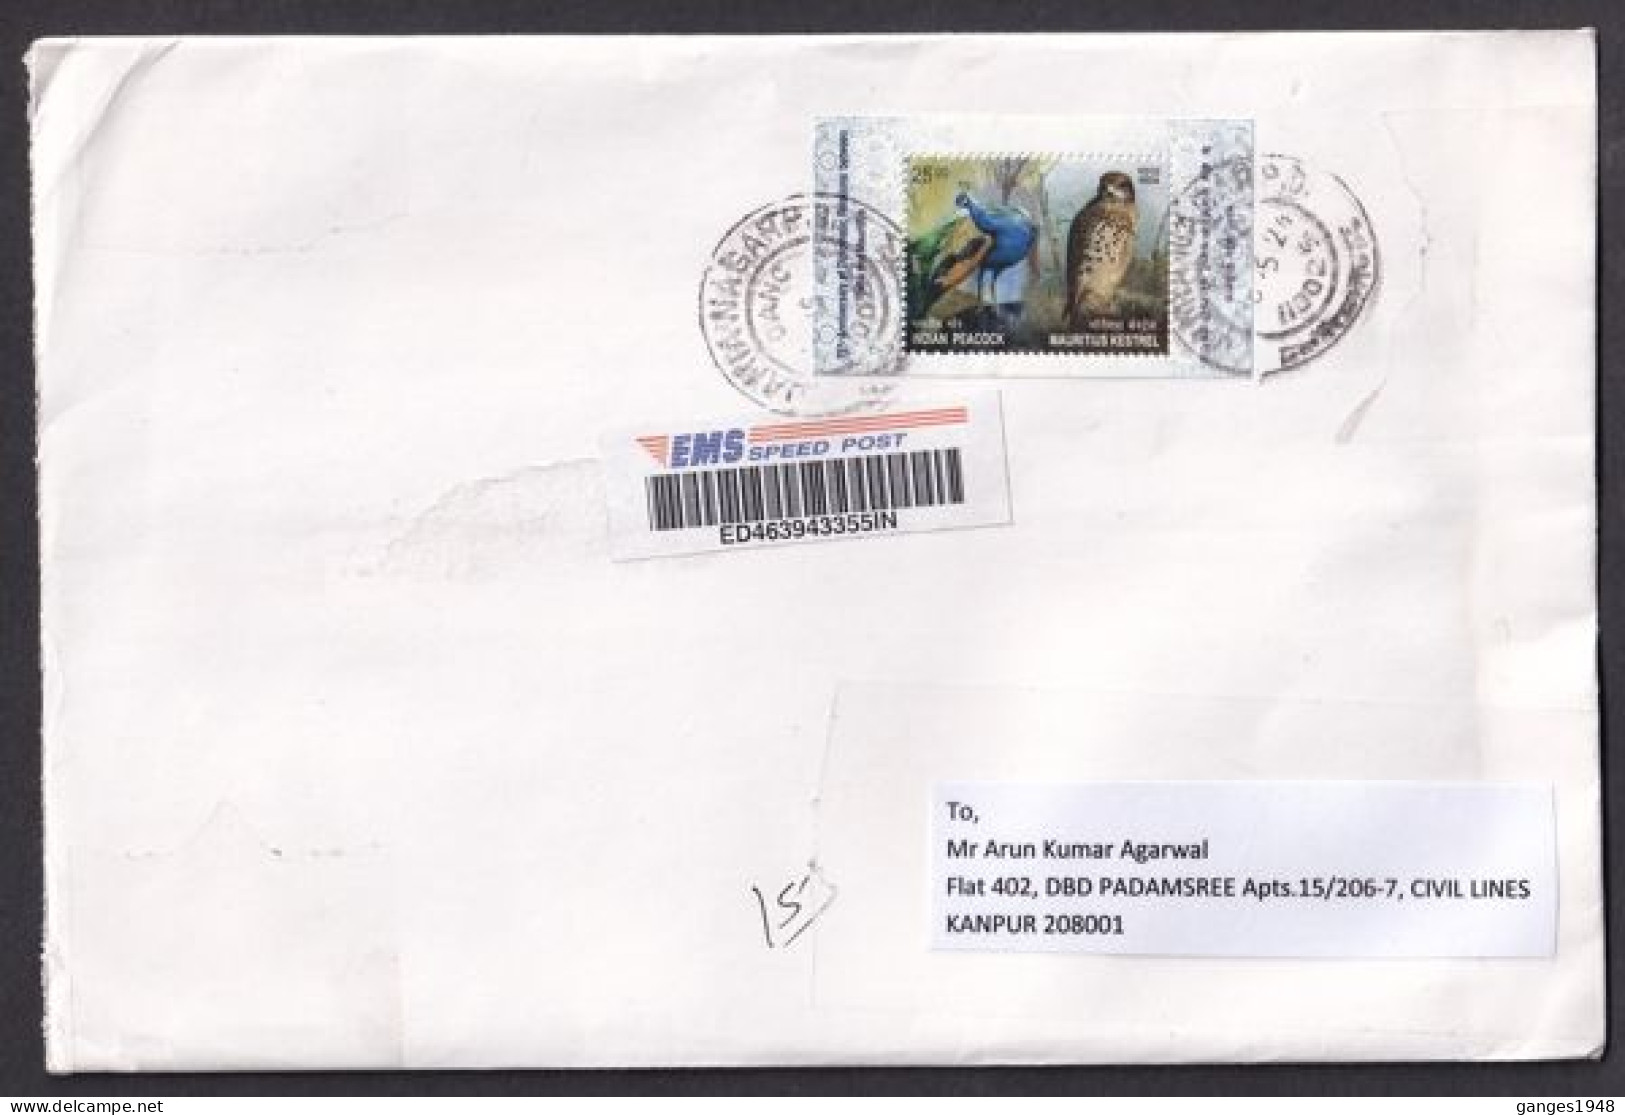 India - Mauritius Joint Issue  Peacock And Kestrel Bird Of Prey  2v MS On Mailed Cover  #  36603  D  Inde Indien - Pavos Reales